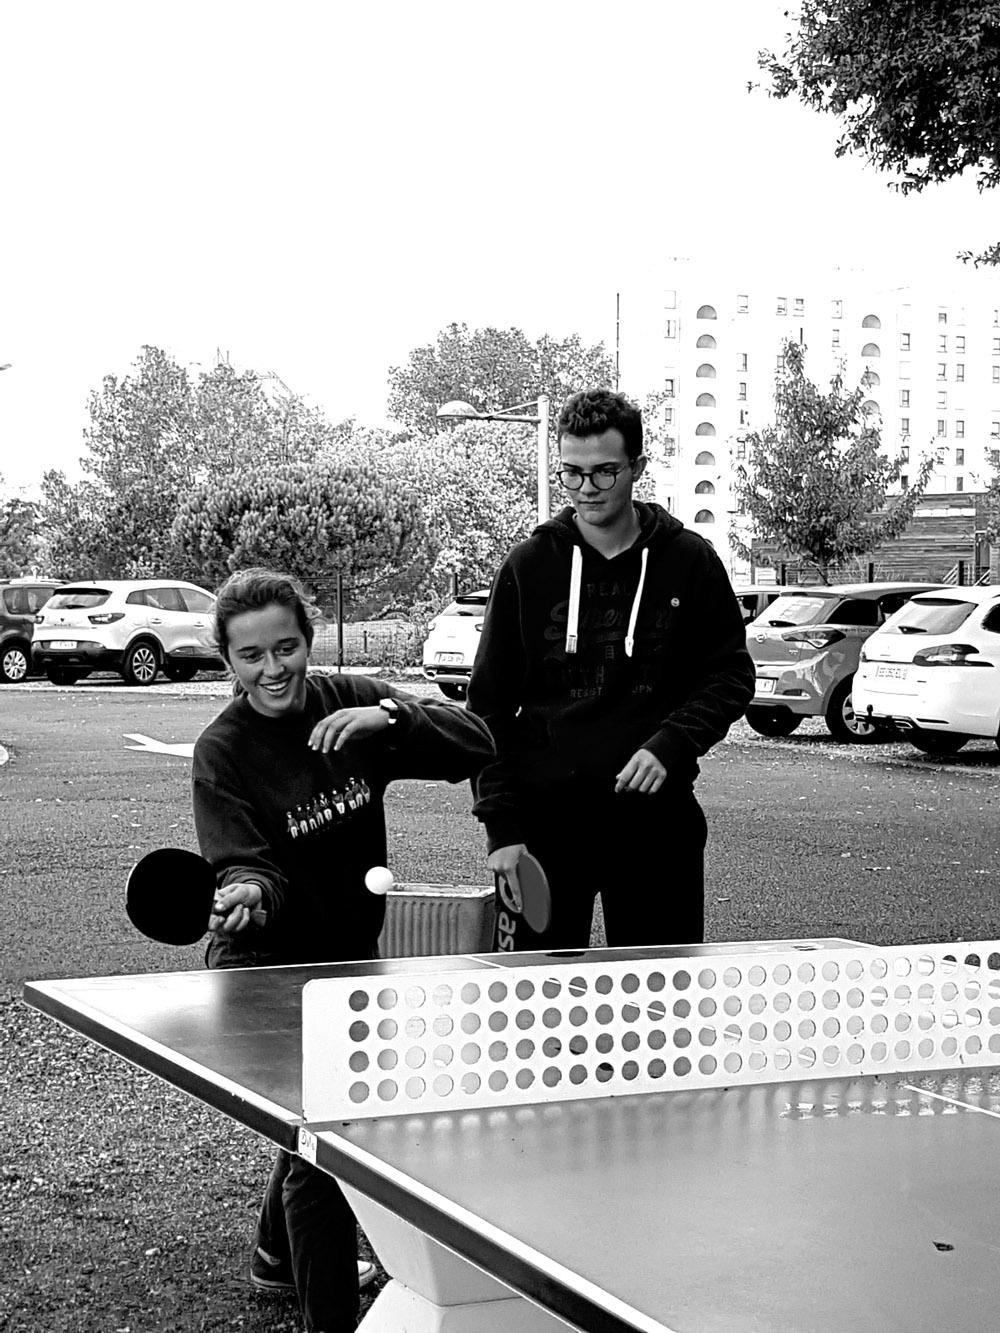 pingpong concoursphoto18